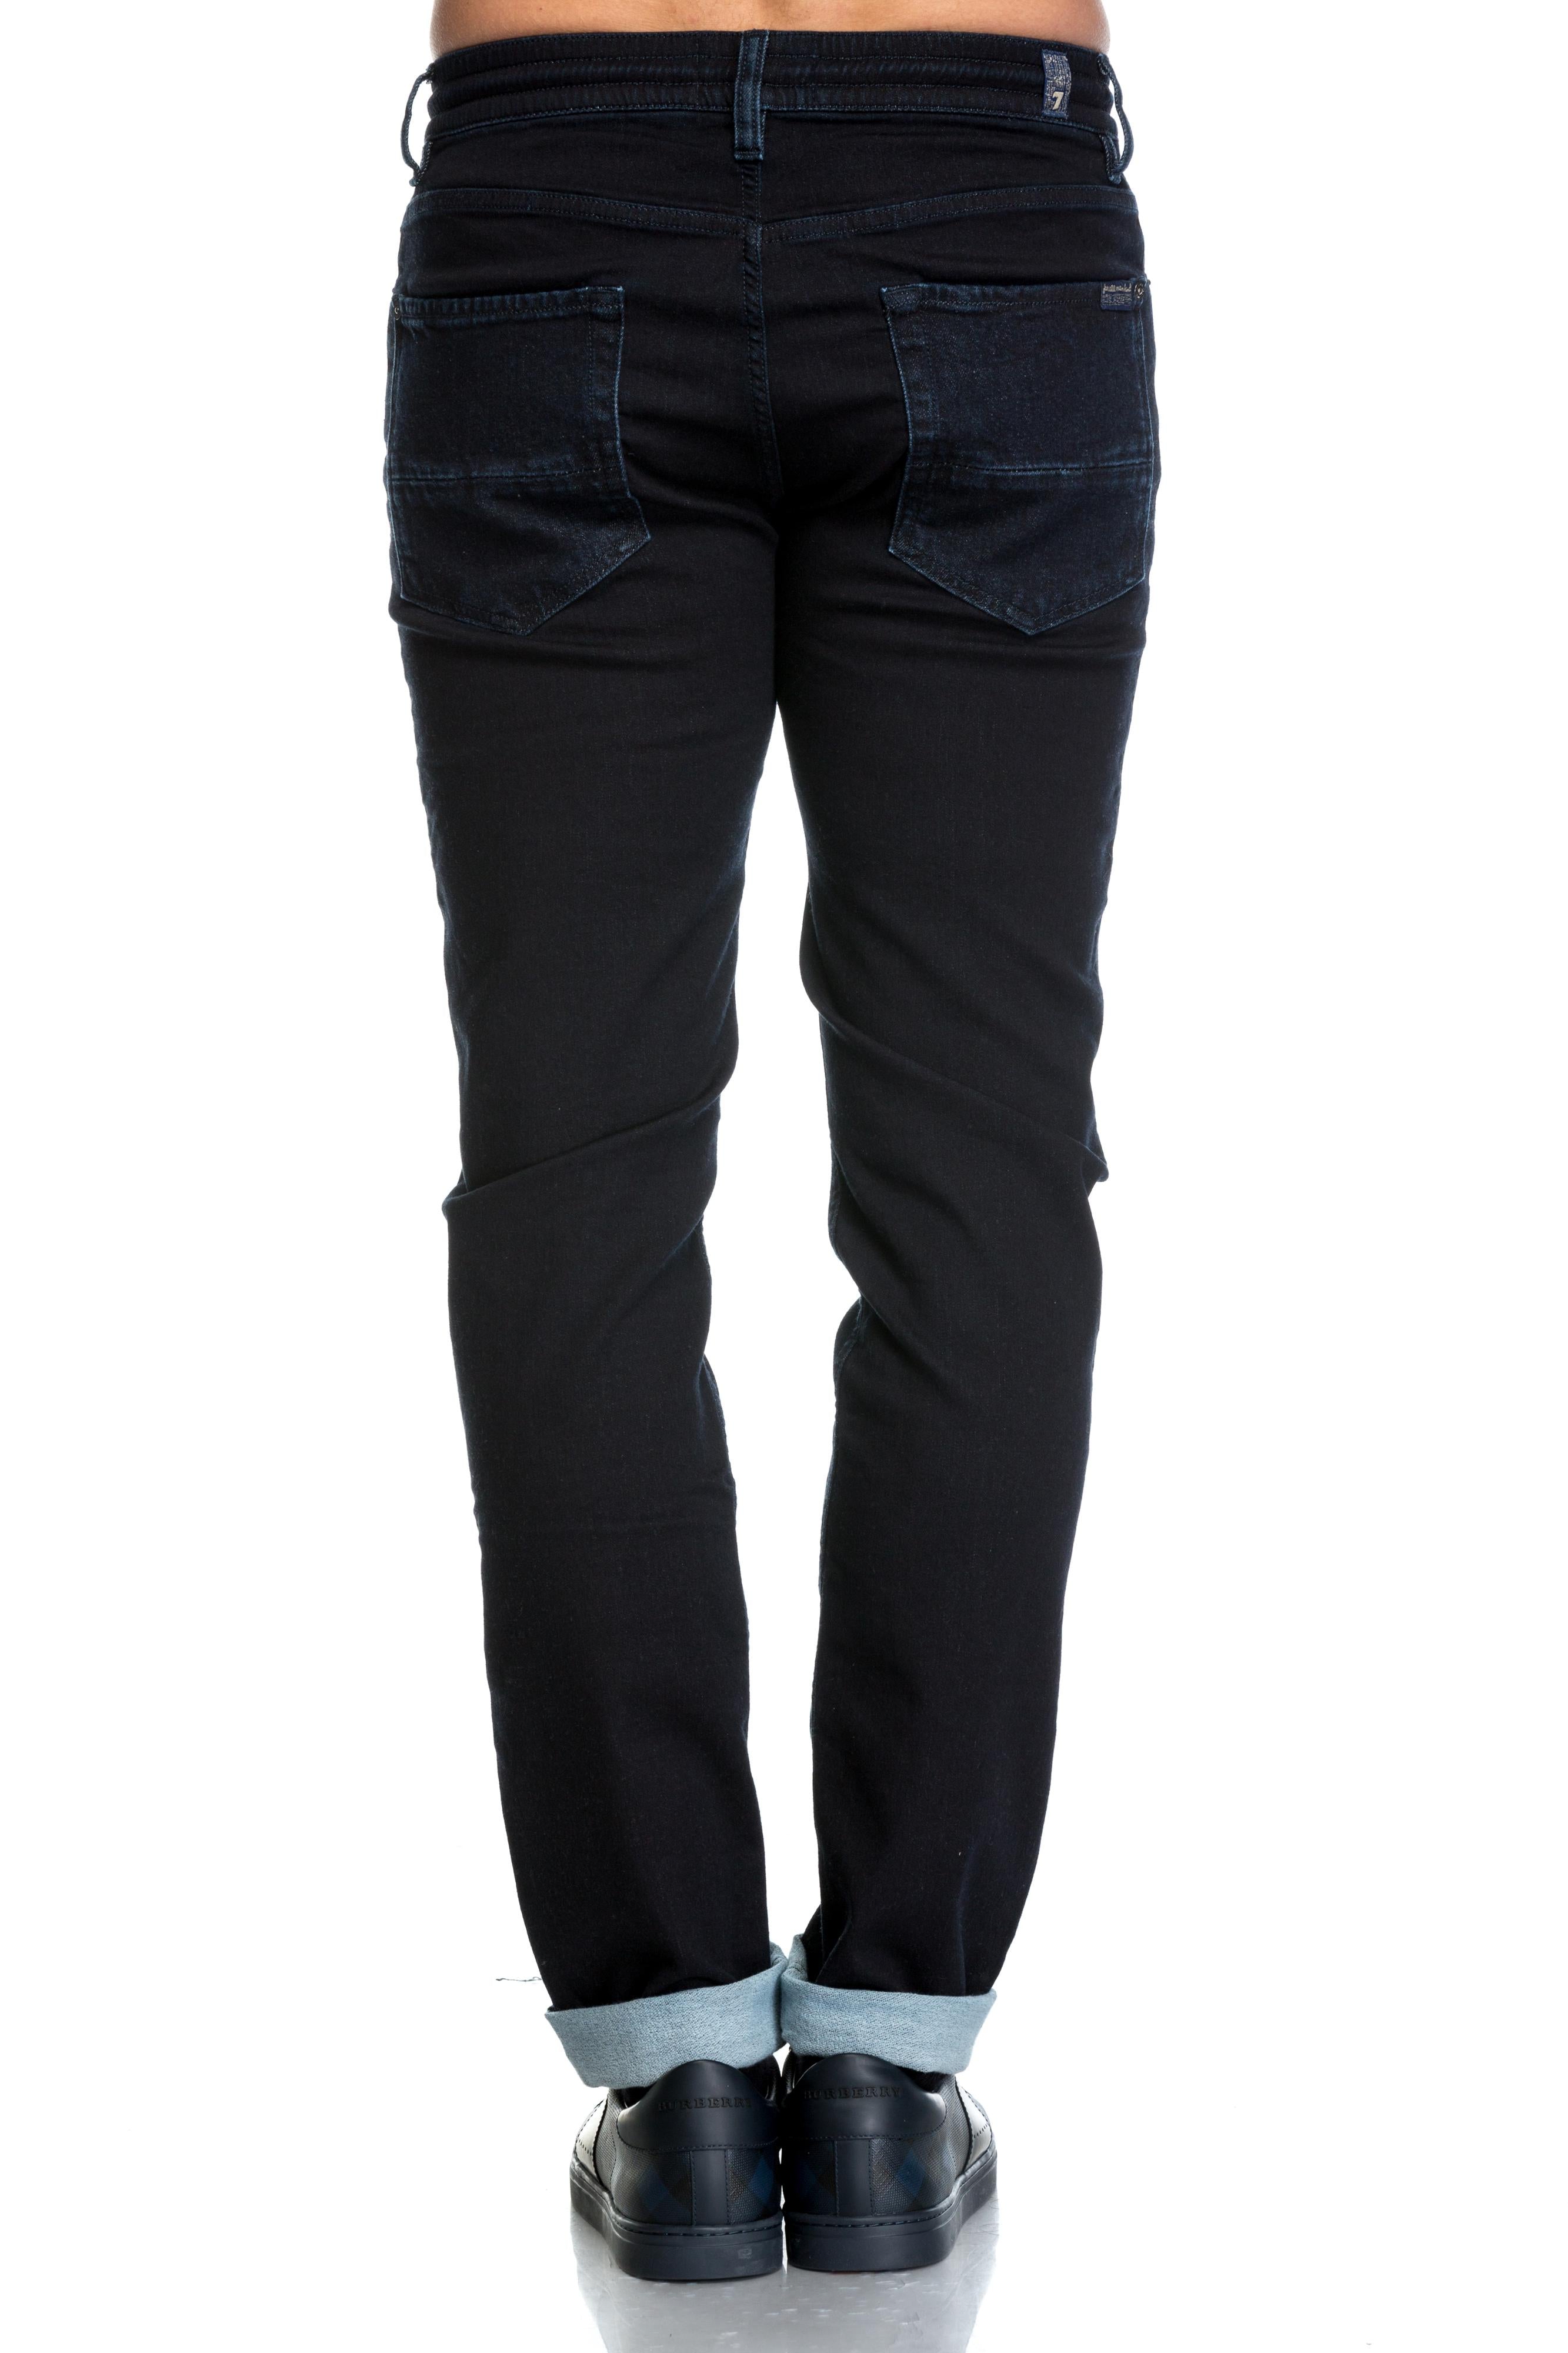 Jeansi Ryan Pant 7 For All Mankind